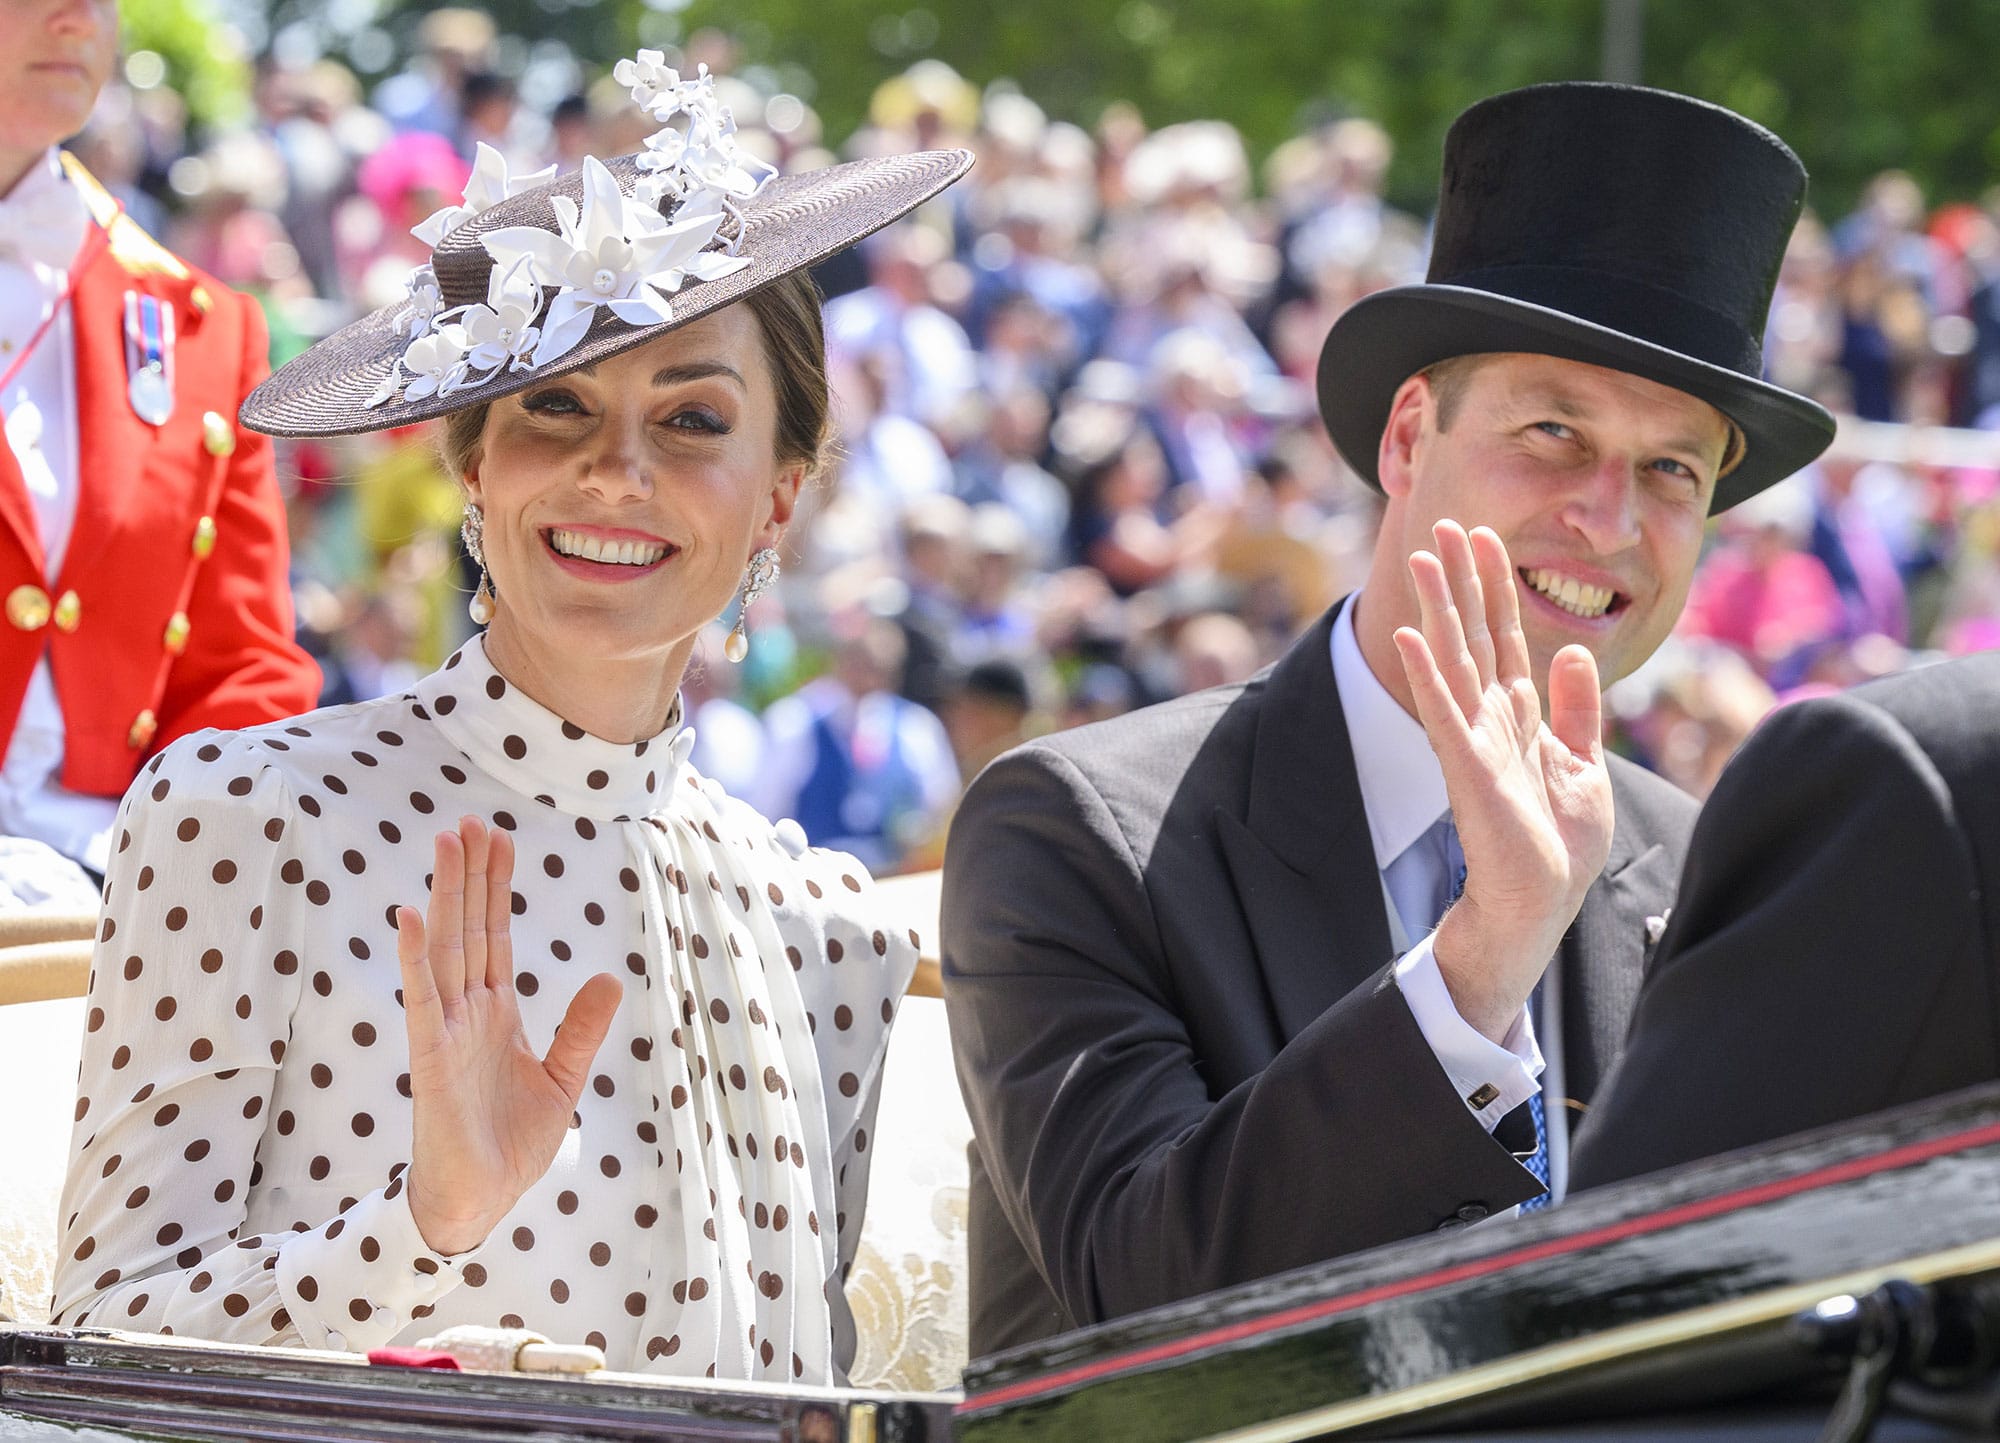 Princess Kate and Prince William in a carriage at The Royal Ascot 2022 on June 17th.